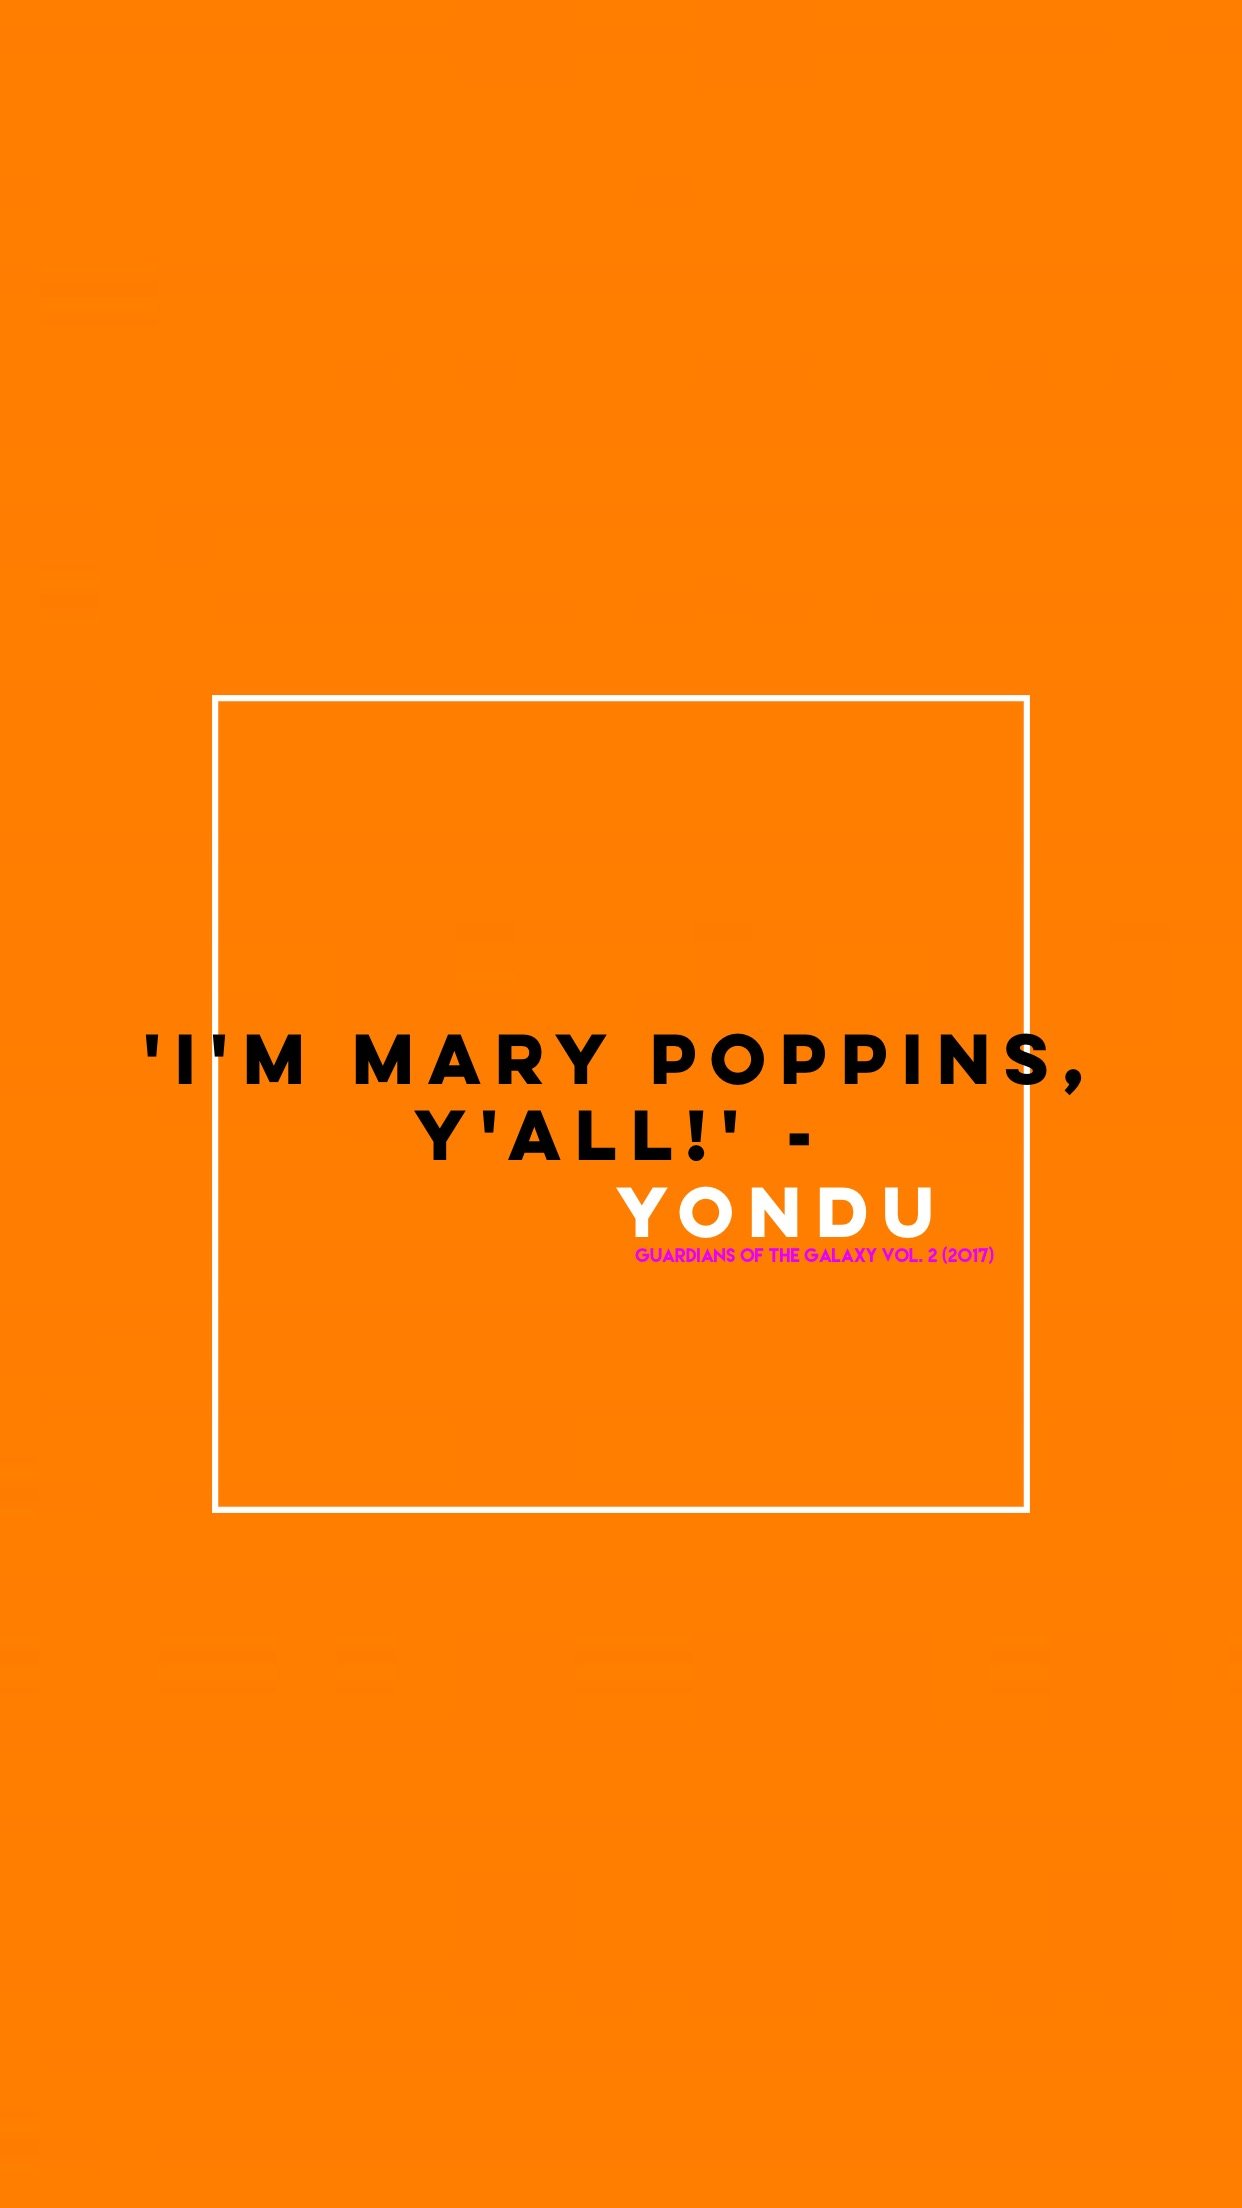 Yondu Udonta, Marvel Cinematic Universe, Movies, Quote, Guardians of the Galaxy, Typography, Minimalism, Orange background Wallpaper